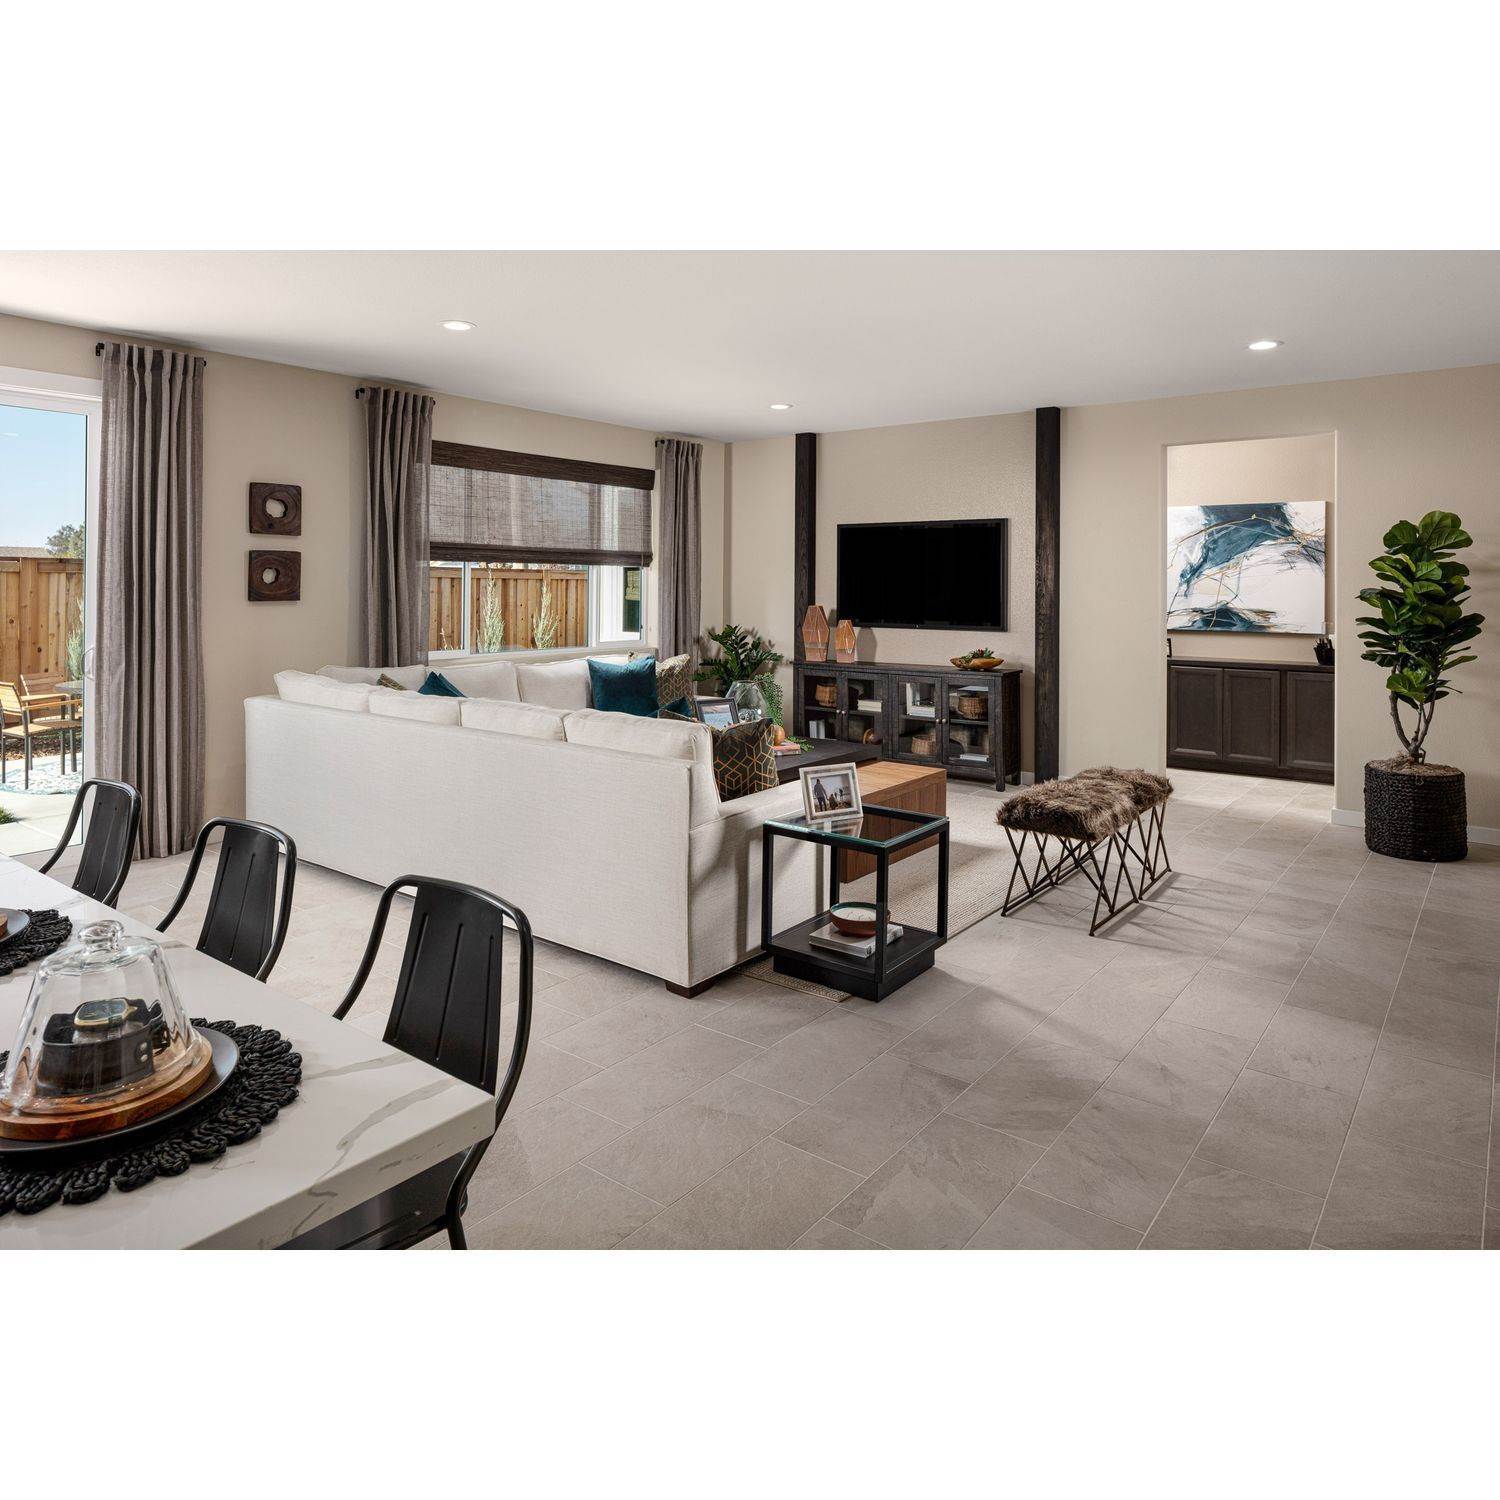 36. Cresleigh Havenwood xây dựng tại 758 Havenwood Drive, Lincoln, CA 95648